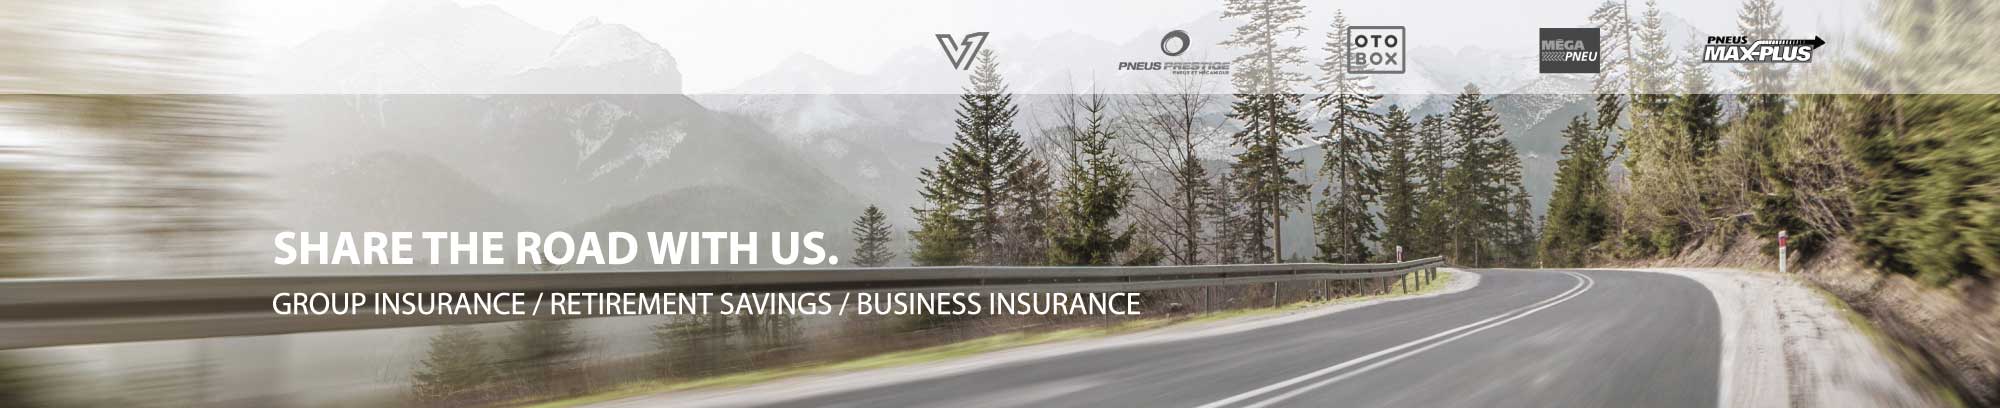 Share the road with us. Group insurance / Retirement savings / Business insurance for Unimax Tire Network Members